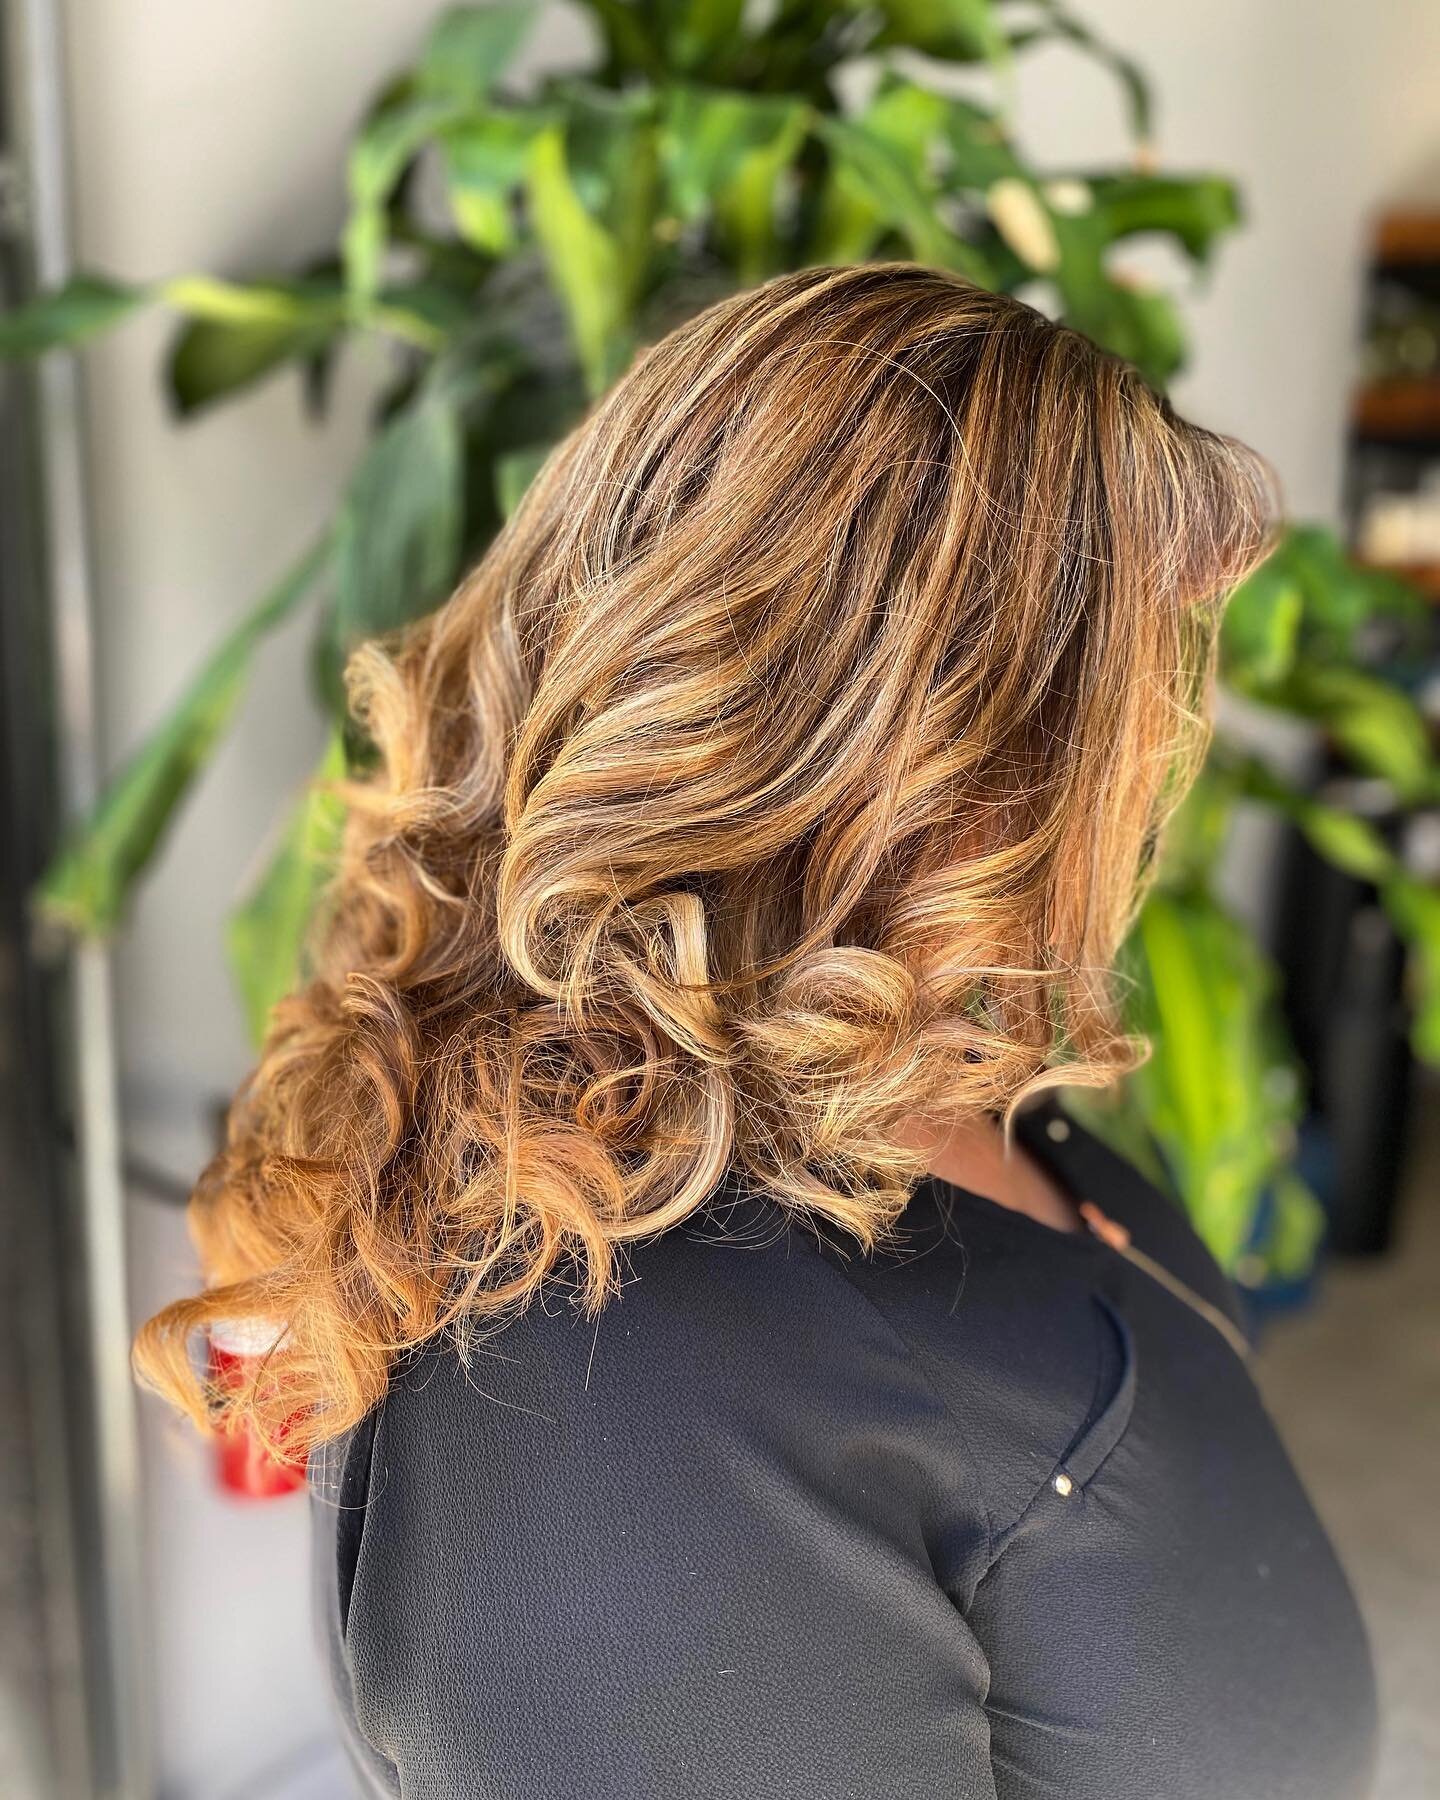 Those curls + that color ✨
We&rsquo;re in love!

@hairbyshawna_k rocked it with this glow up. Check out our website to see more of her work and to contact her to schedule your next appointment!

.

.

.

#lemotive #hairsalon #glowup #curls #curlyhair